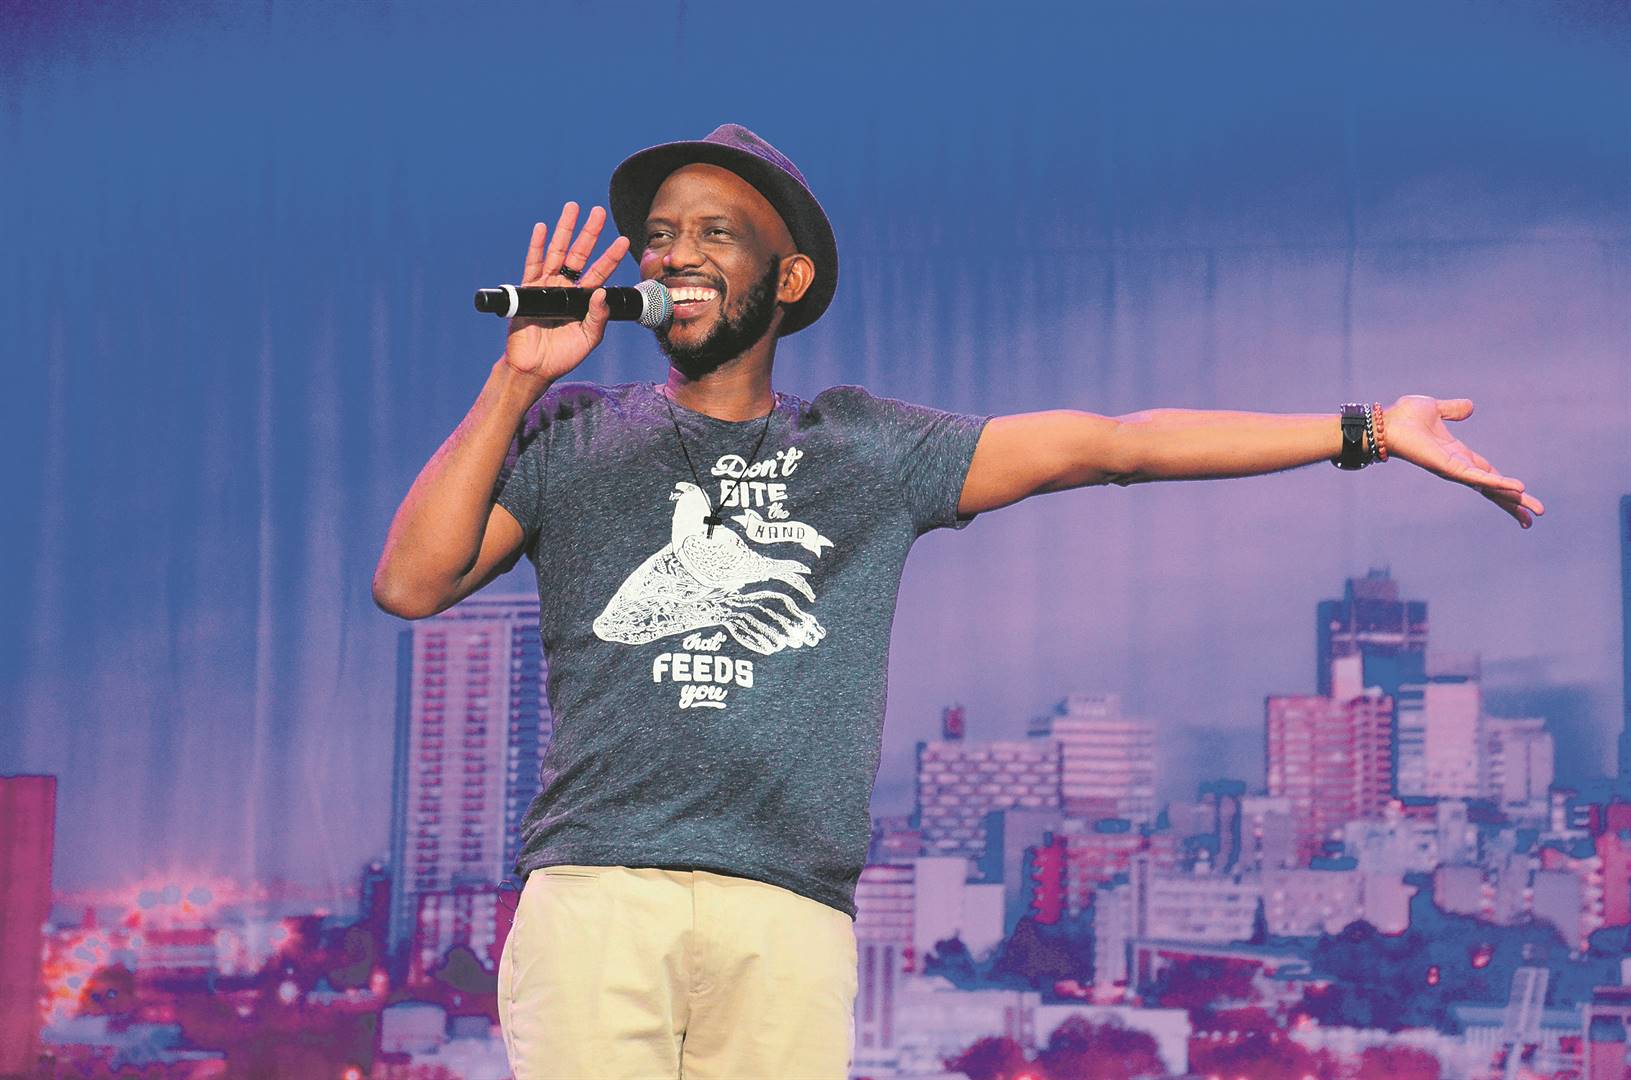 David Kau says parents will relate to his jokes during the show on Saturday. 